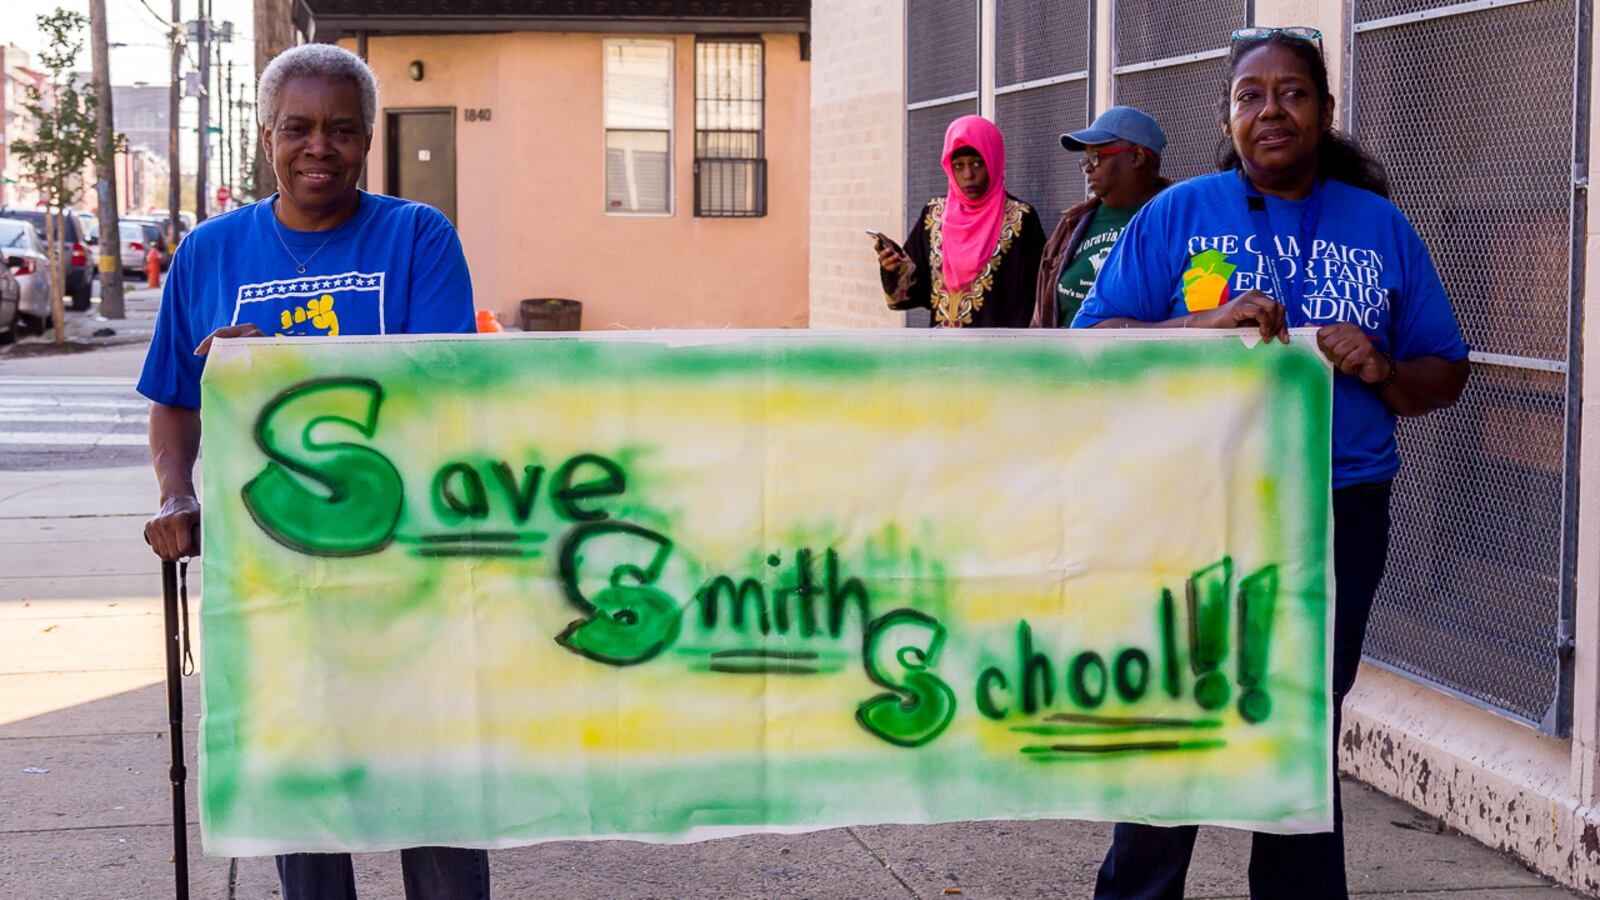 Two people holding a green and yellow banner that reads: Save smith schools.